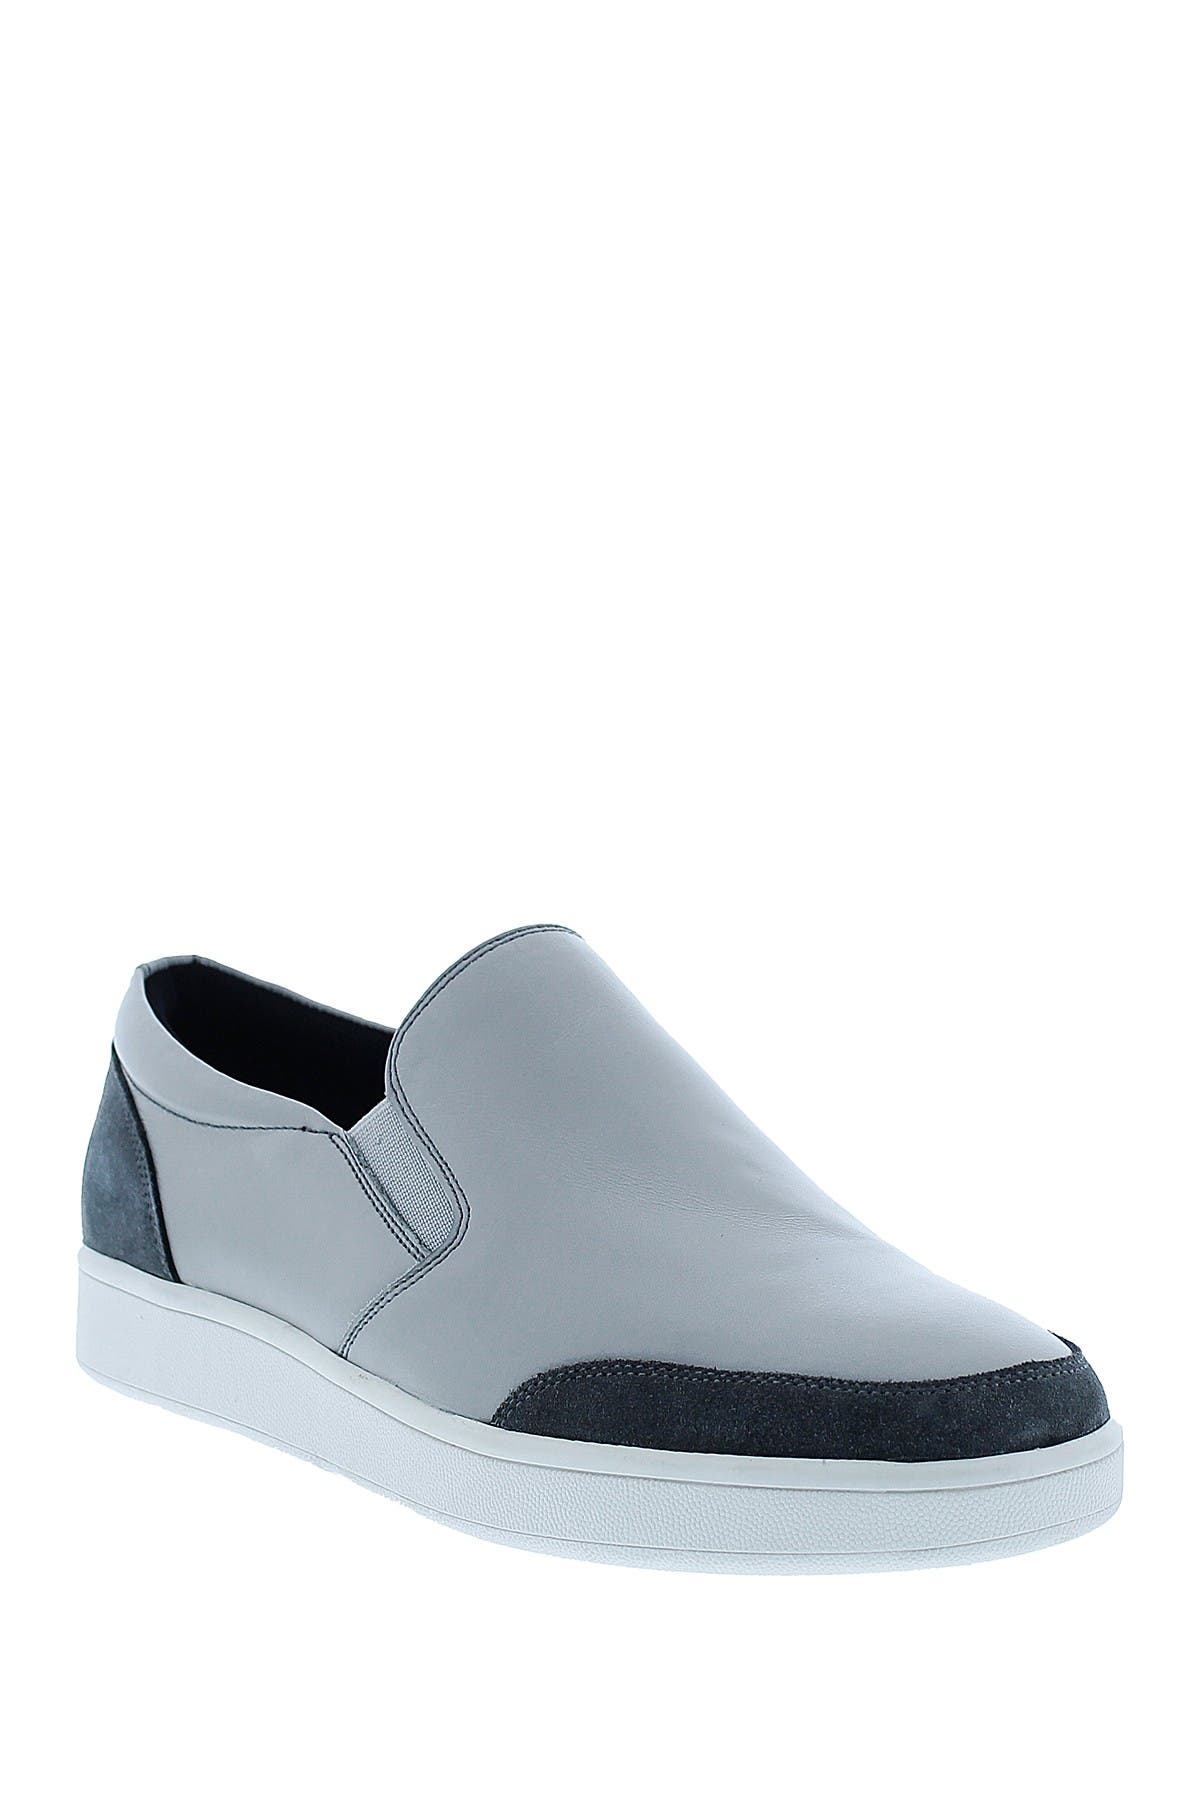 English Laundry High Sneaker In Grey